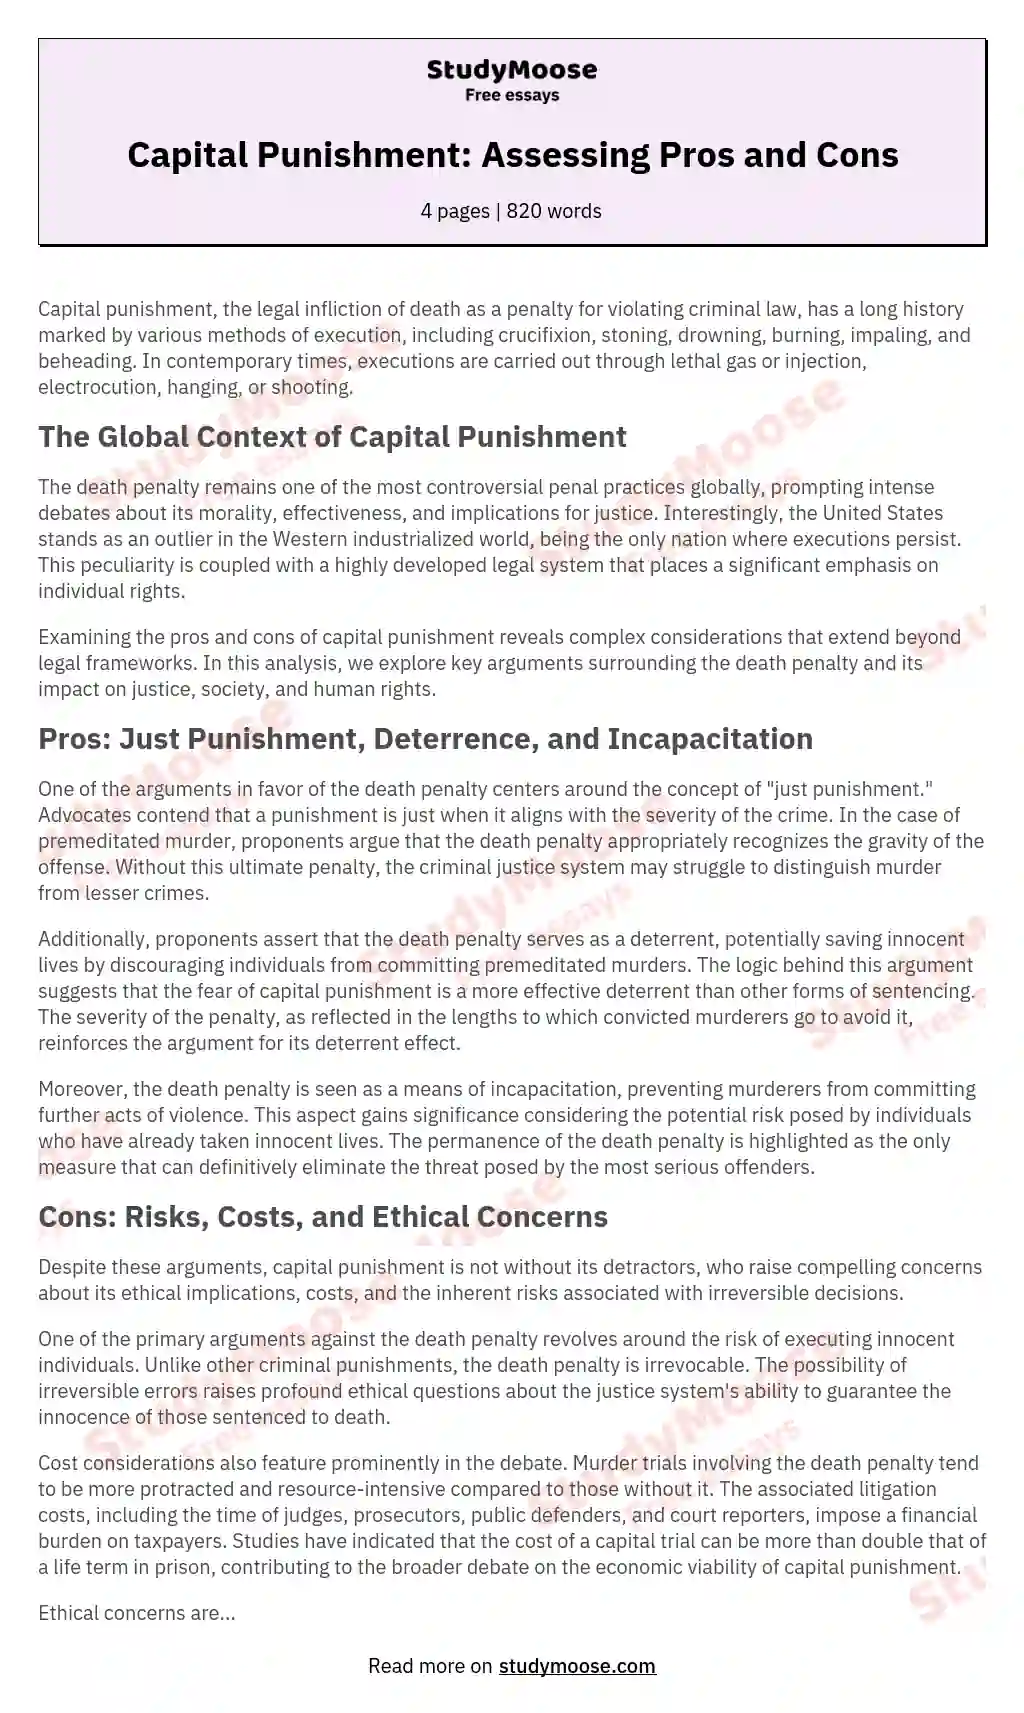 Capital Punishment: Assessing Pros and Cons essay